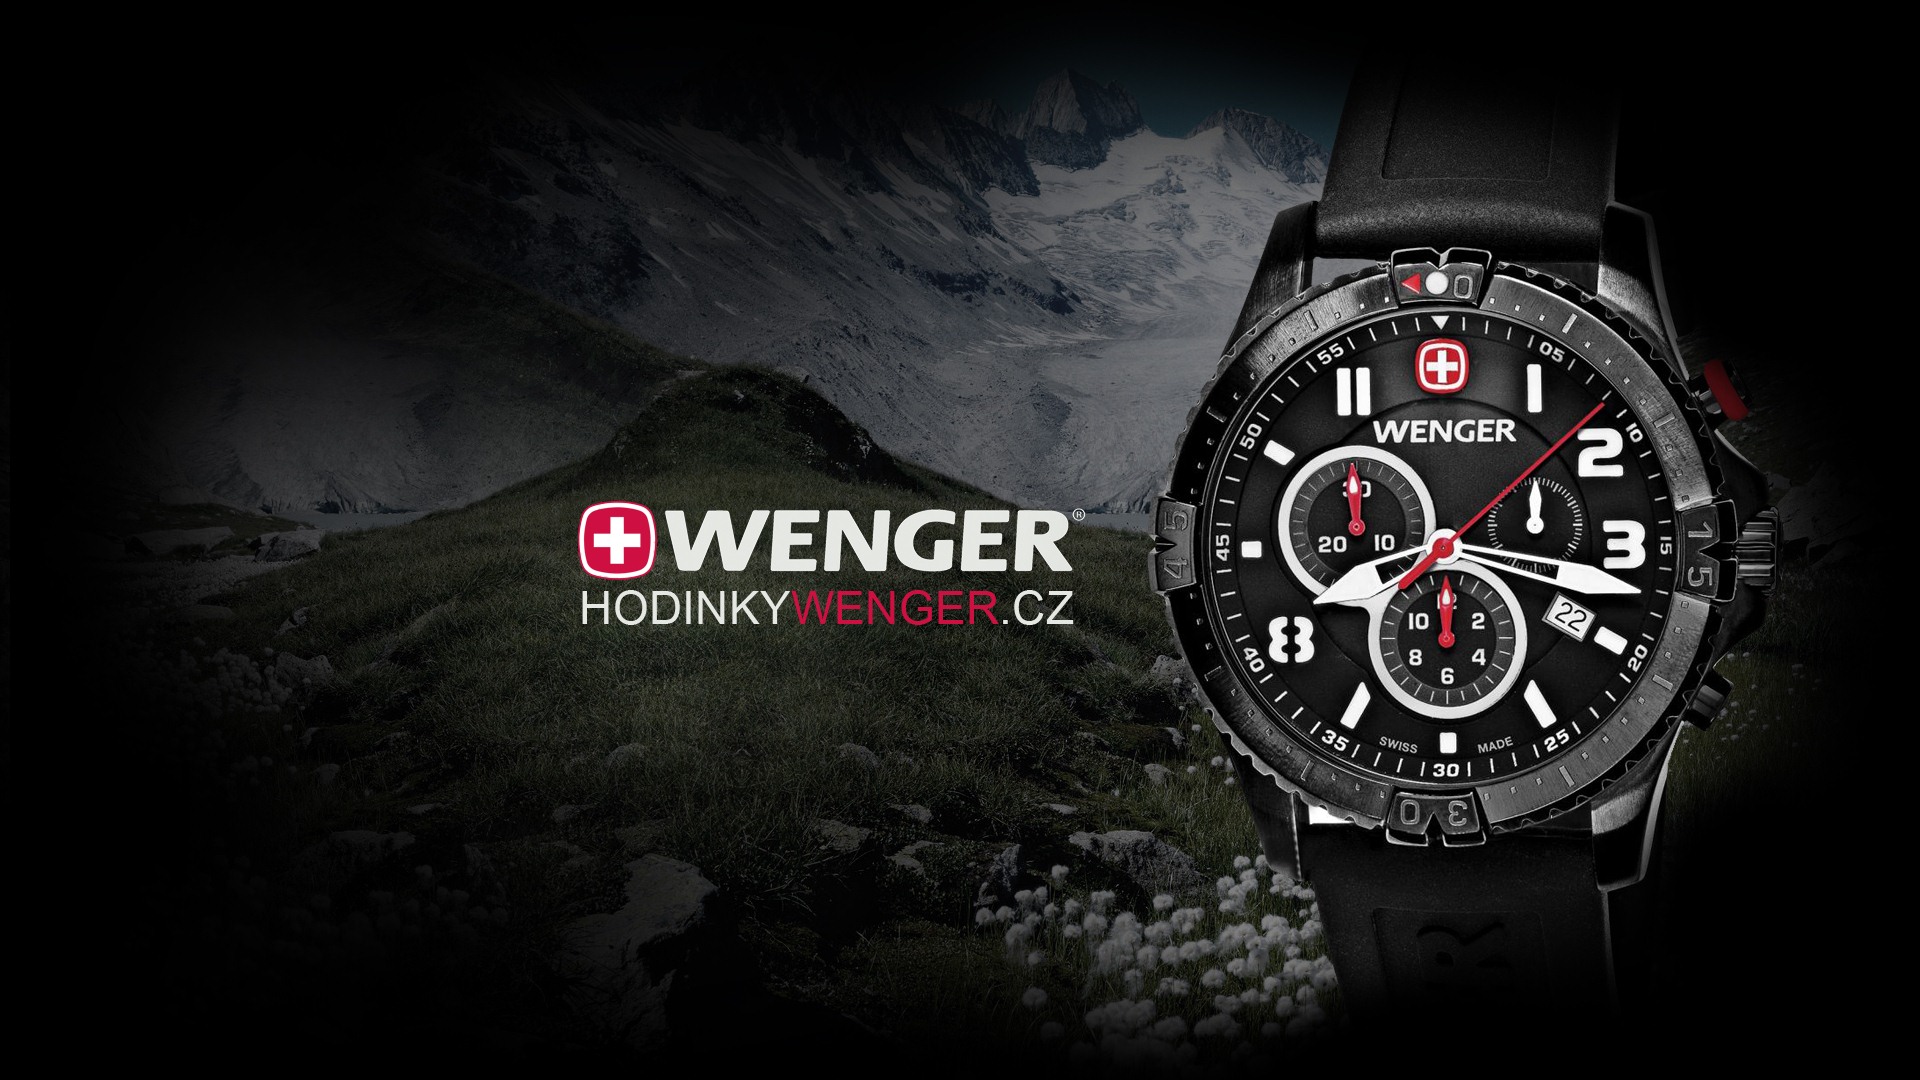 World famous watches wallpapers (1) #1 - 1920x1080